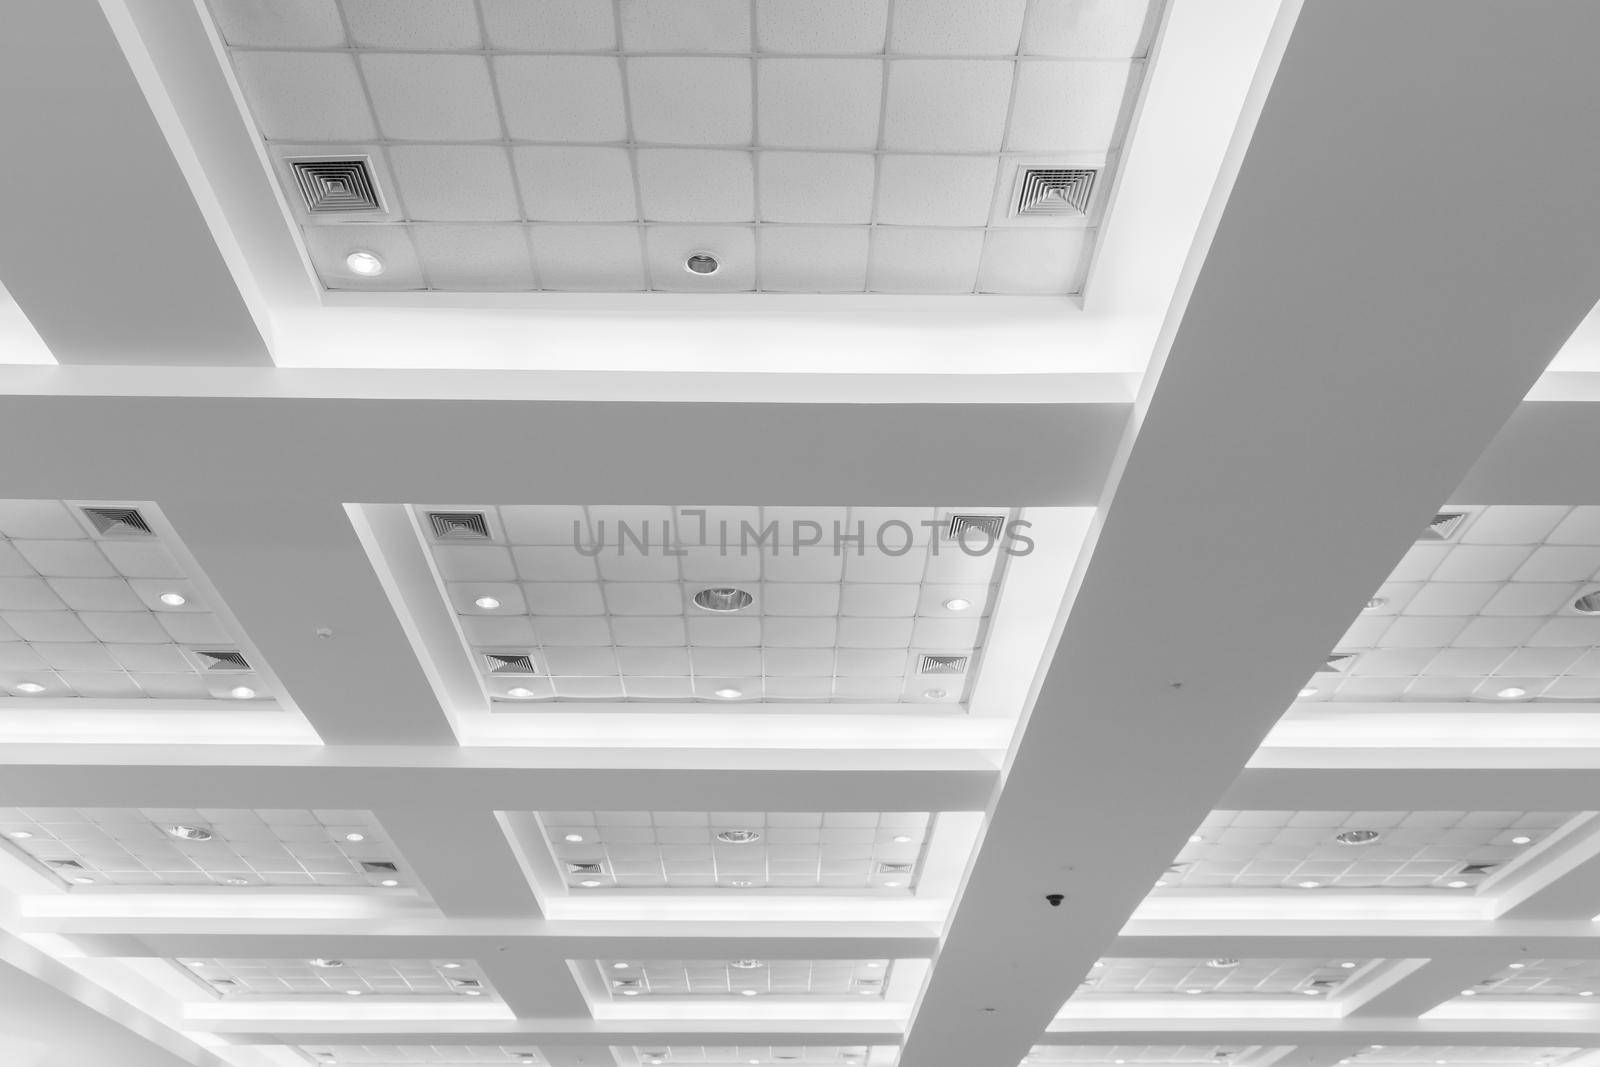 ceiling of business interior office building and light neon. style monochrome with copy space add text